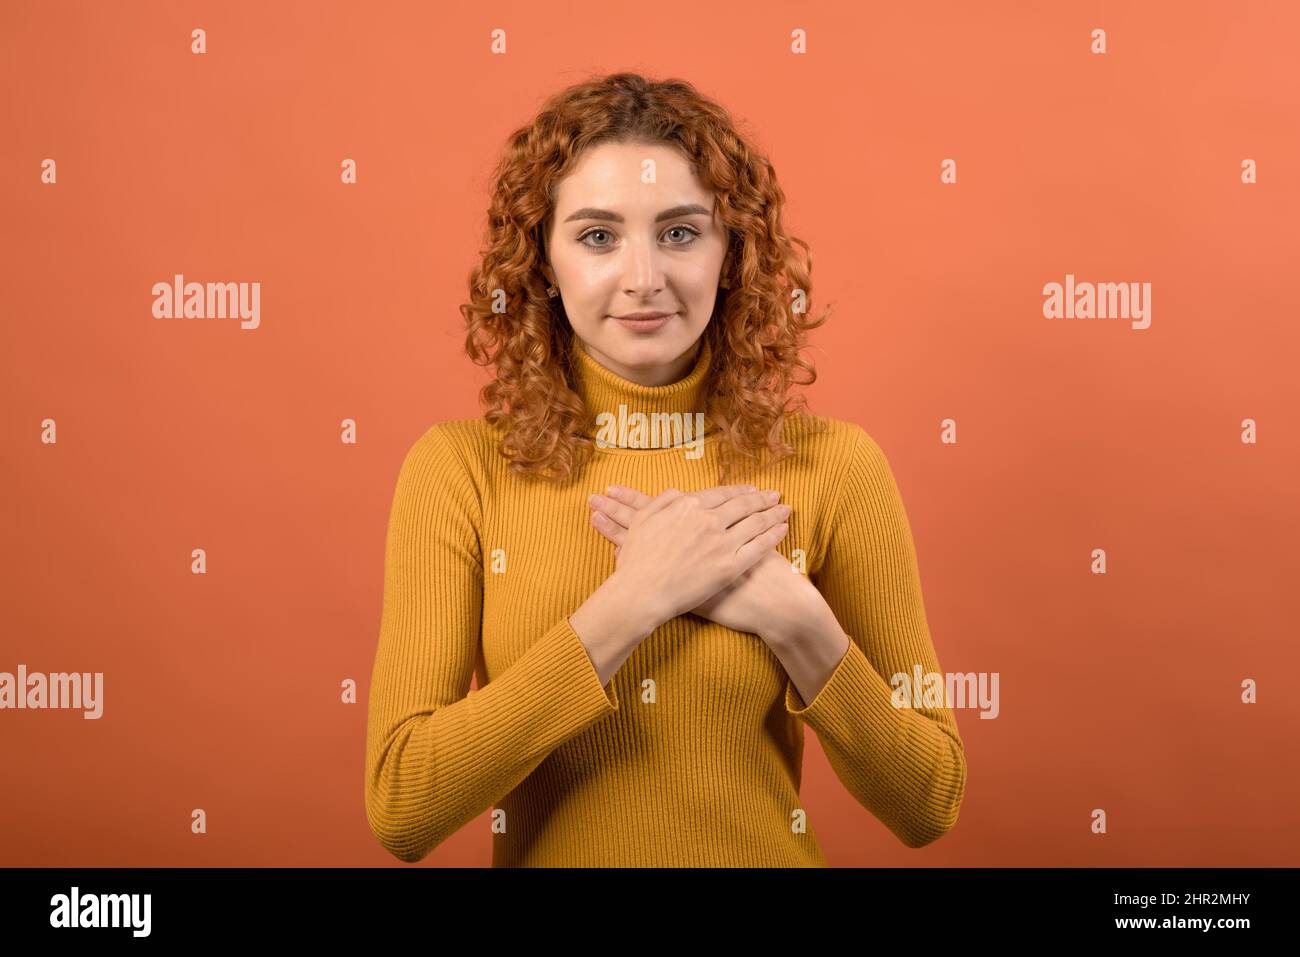 Young and attractive redhead Caucasian girl in orange jumper showing gratitude gesture while holding hands at chest isolated on orange studio backgrou Stock Photo